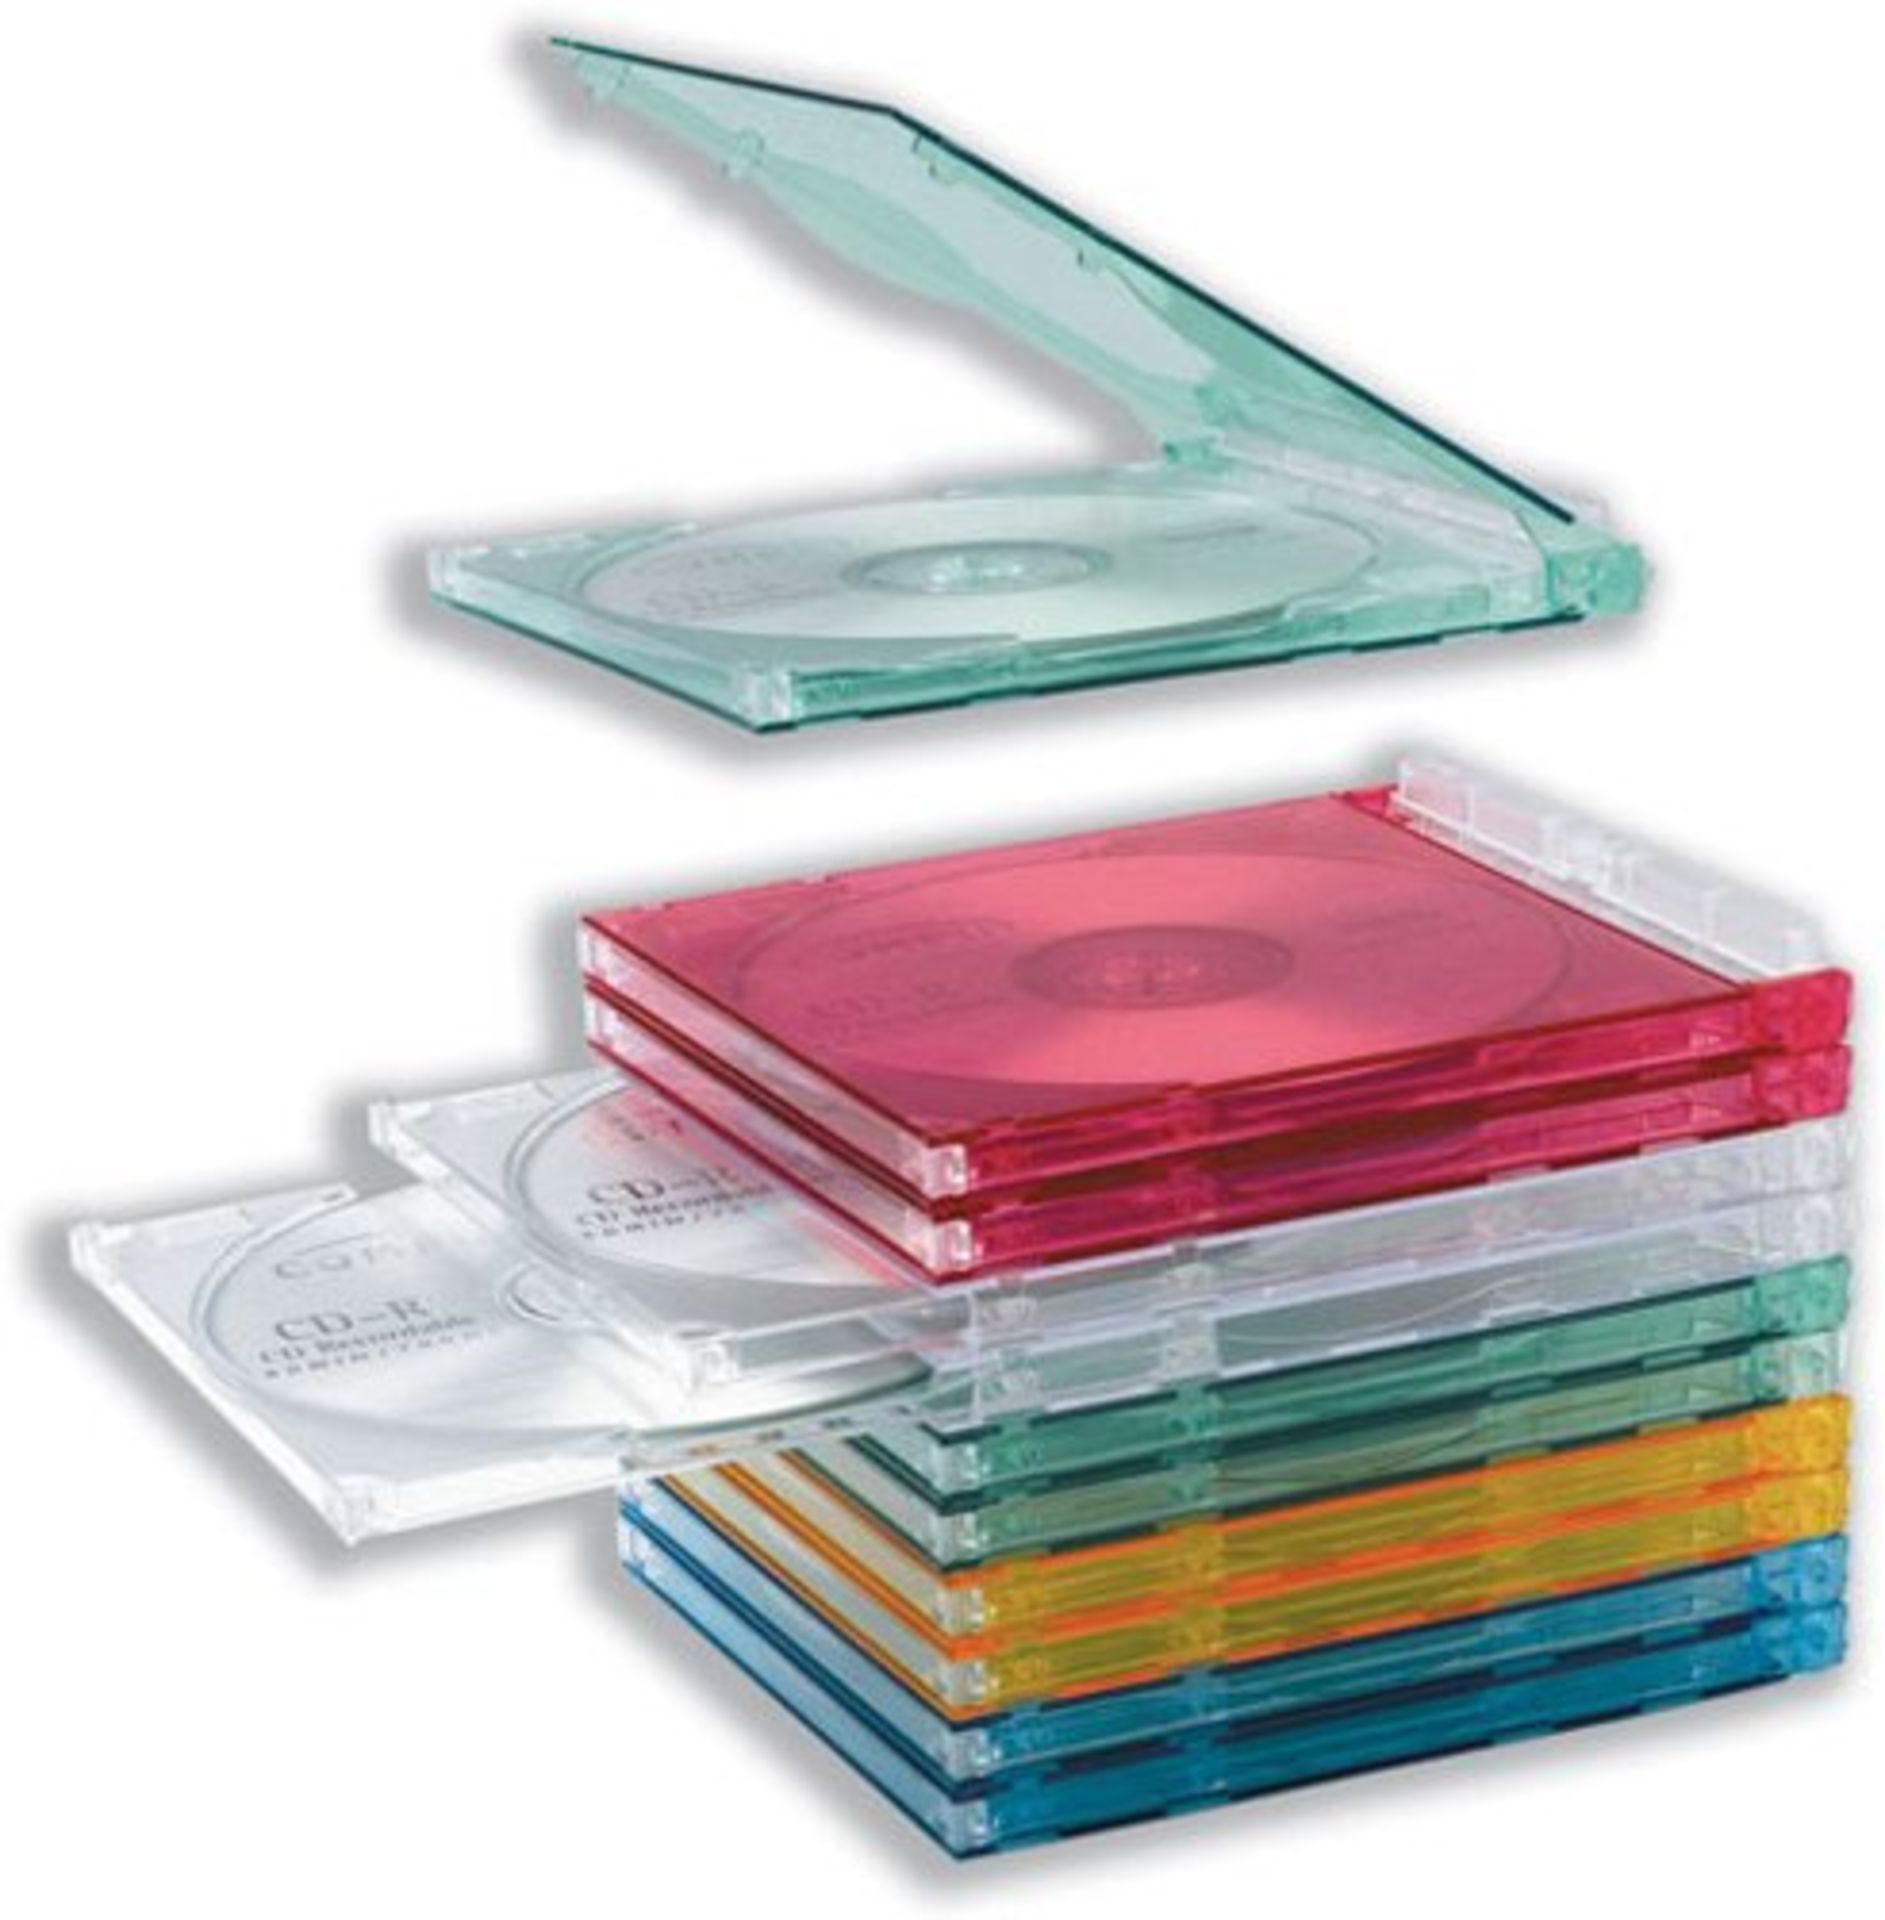 3 x Boxes of Compucessory Interlocking Jewel Cases Code 95501 - 300 Cases in Total (RRP £7.60 Each)